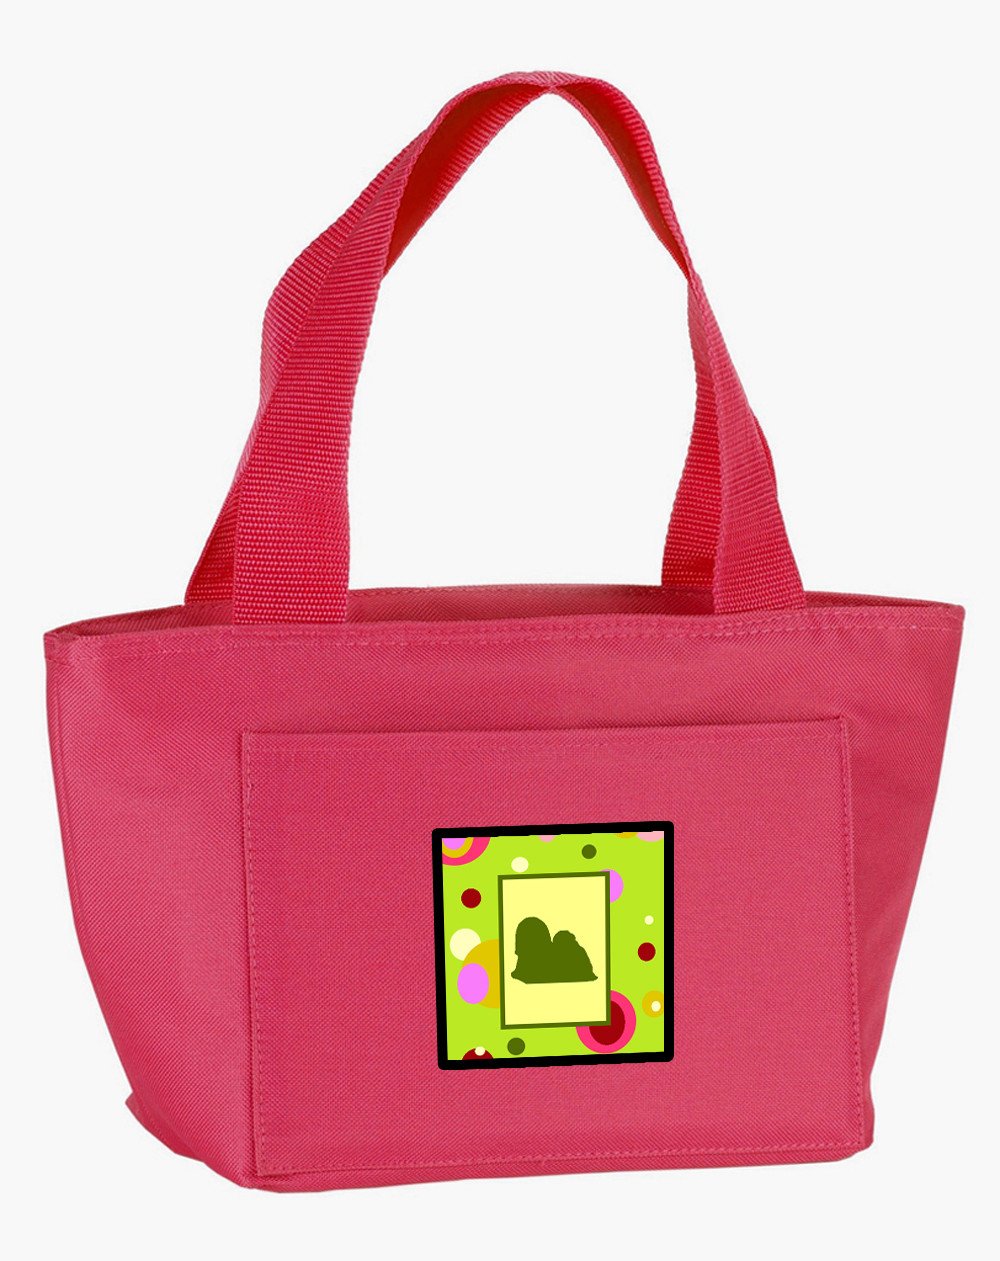 Lime Green Dots Lhasa Apso Lunch Bag CK1139PK-8808 by Caroline's Treasures